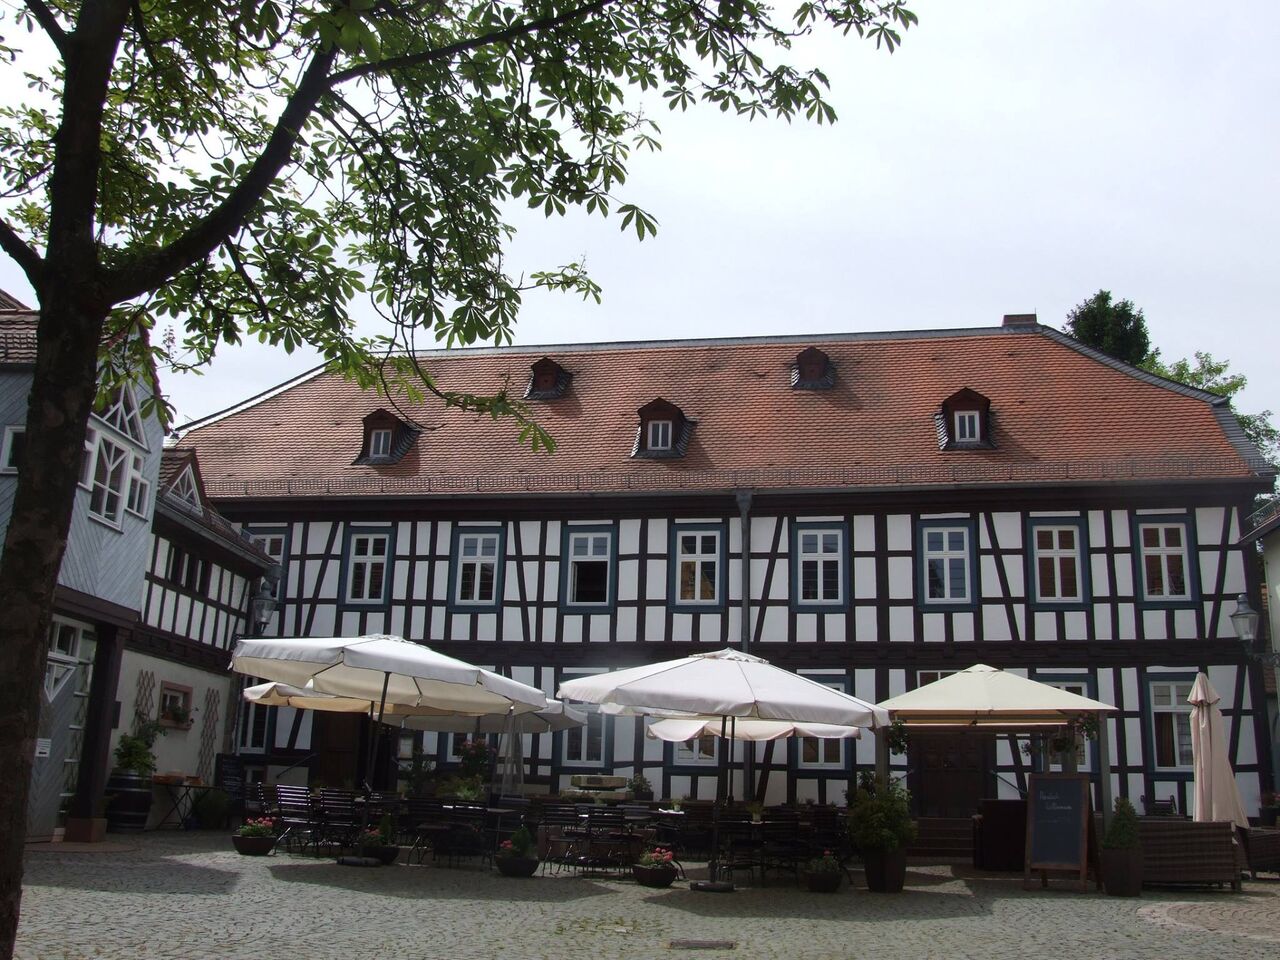 A photo of Hammermühle